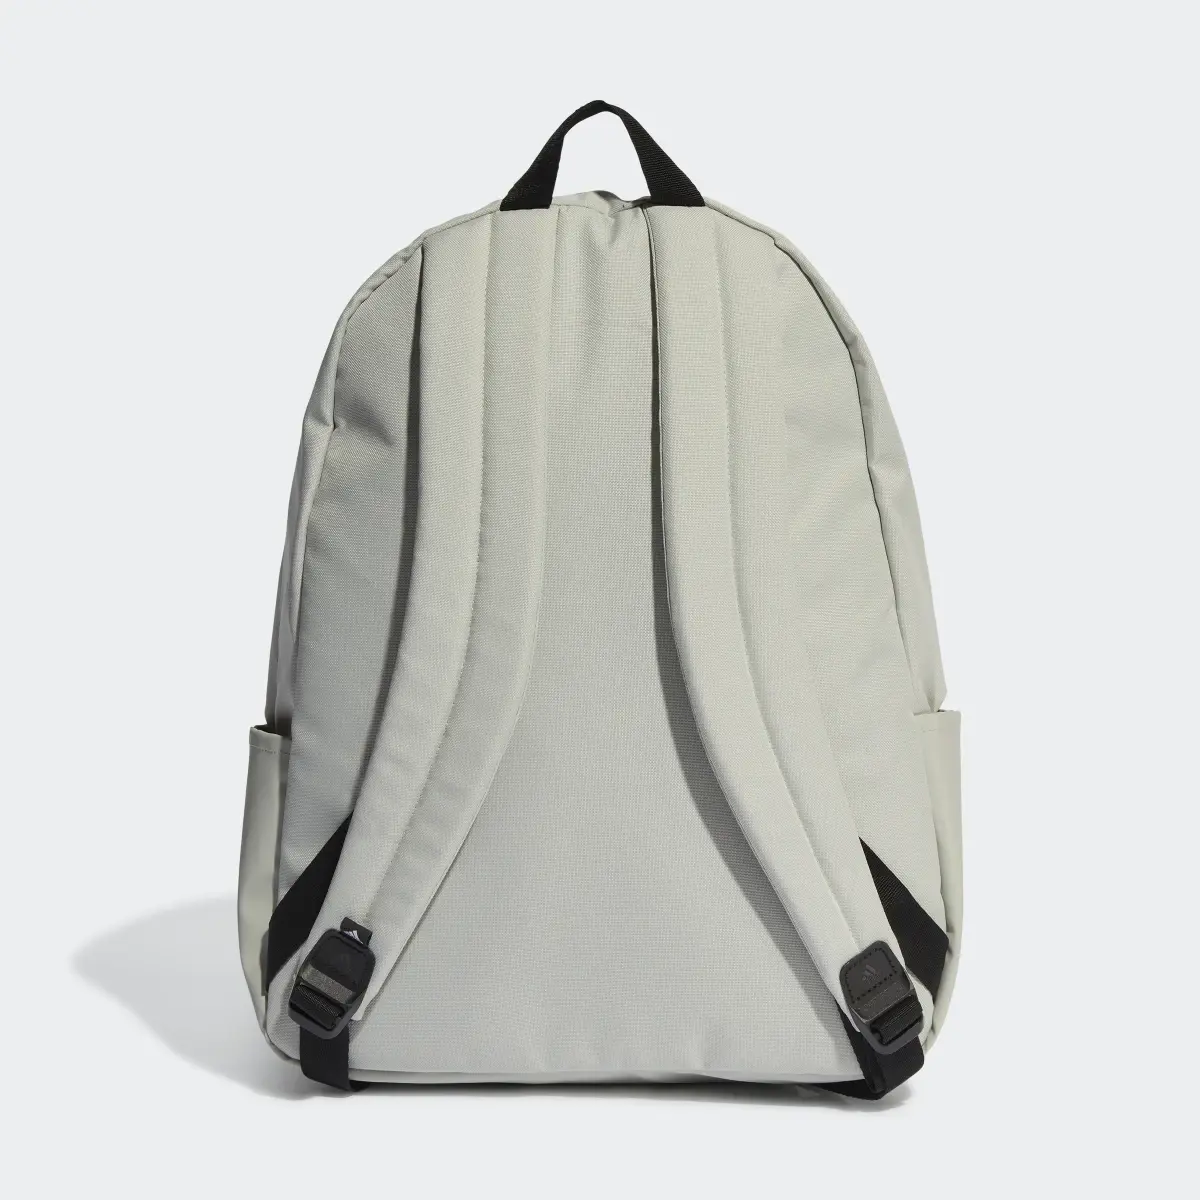 Adidas Classic Badge of Sport Backpack. 3